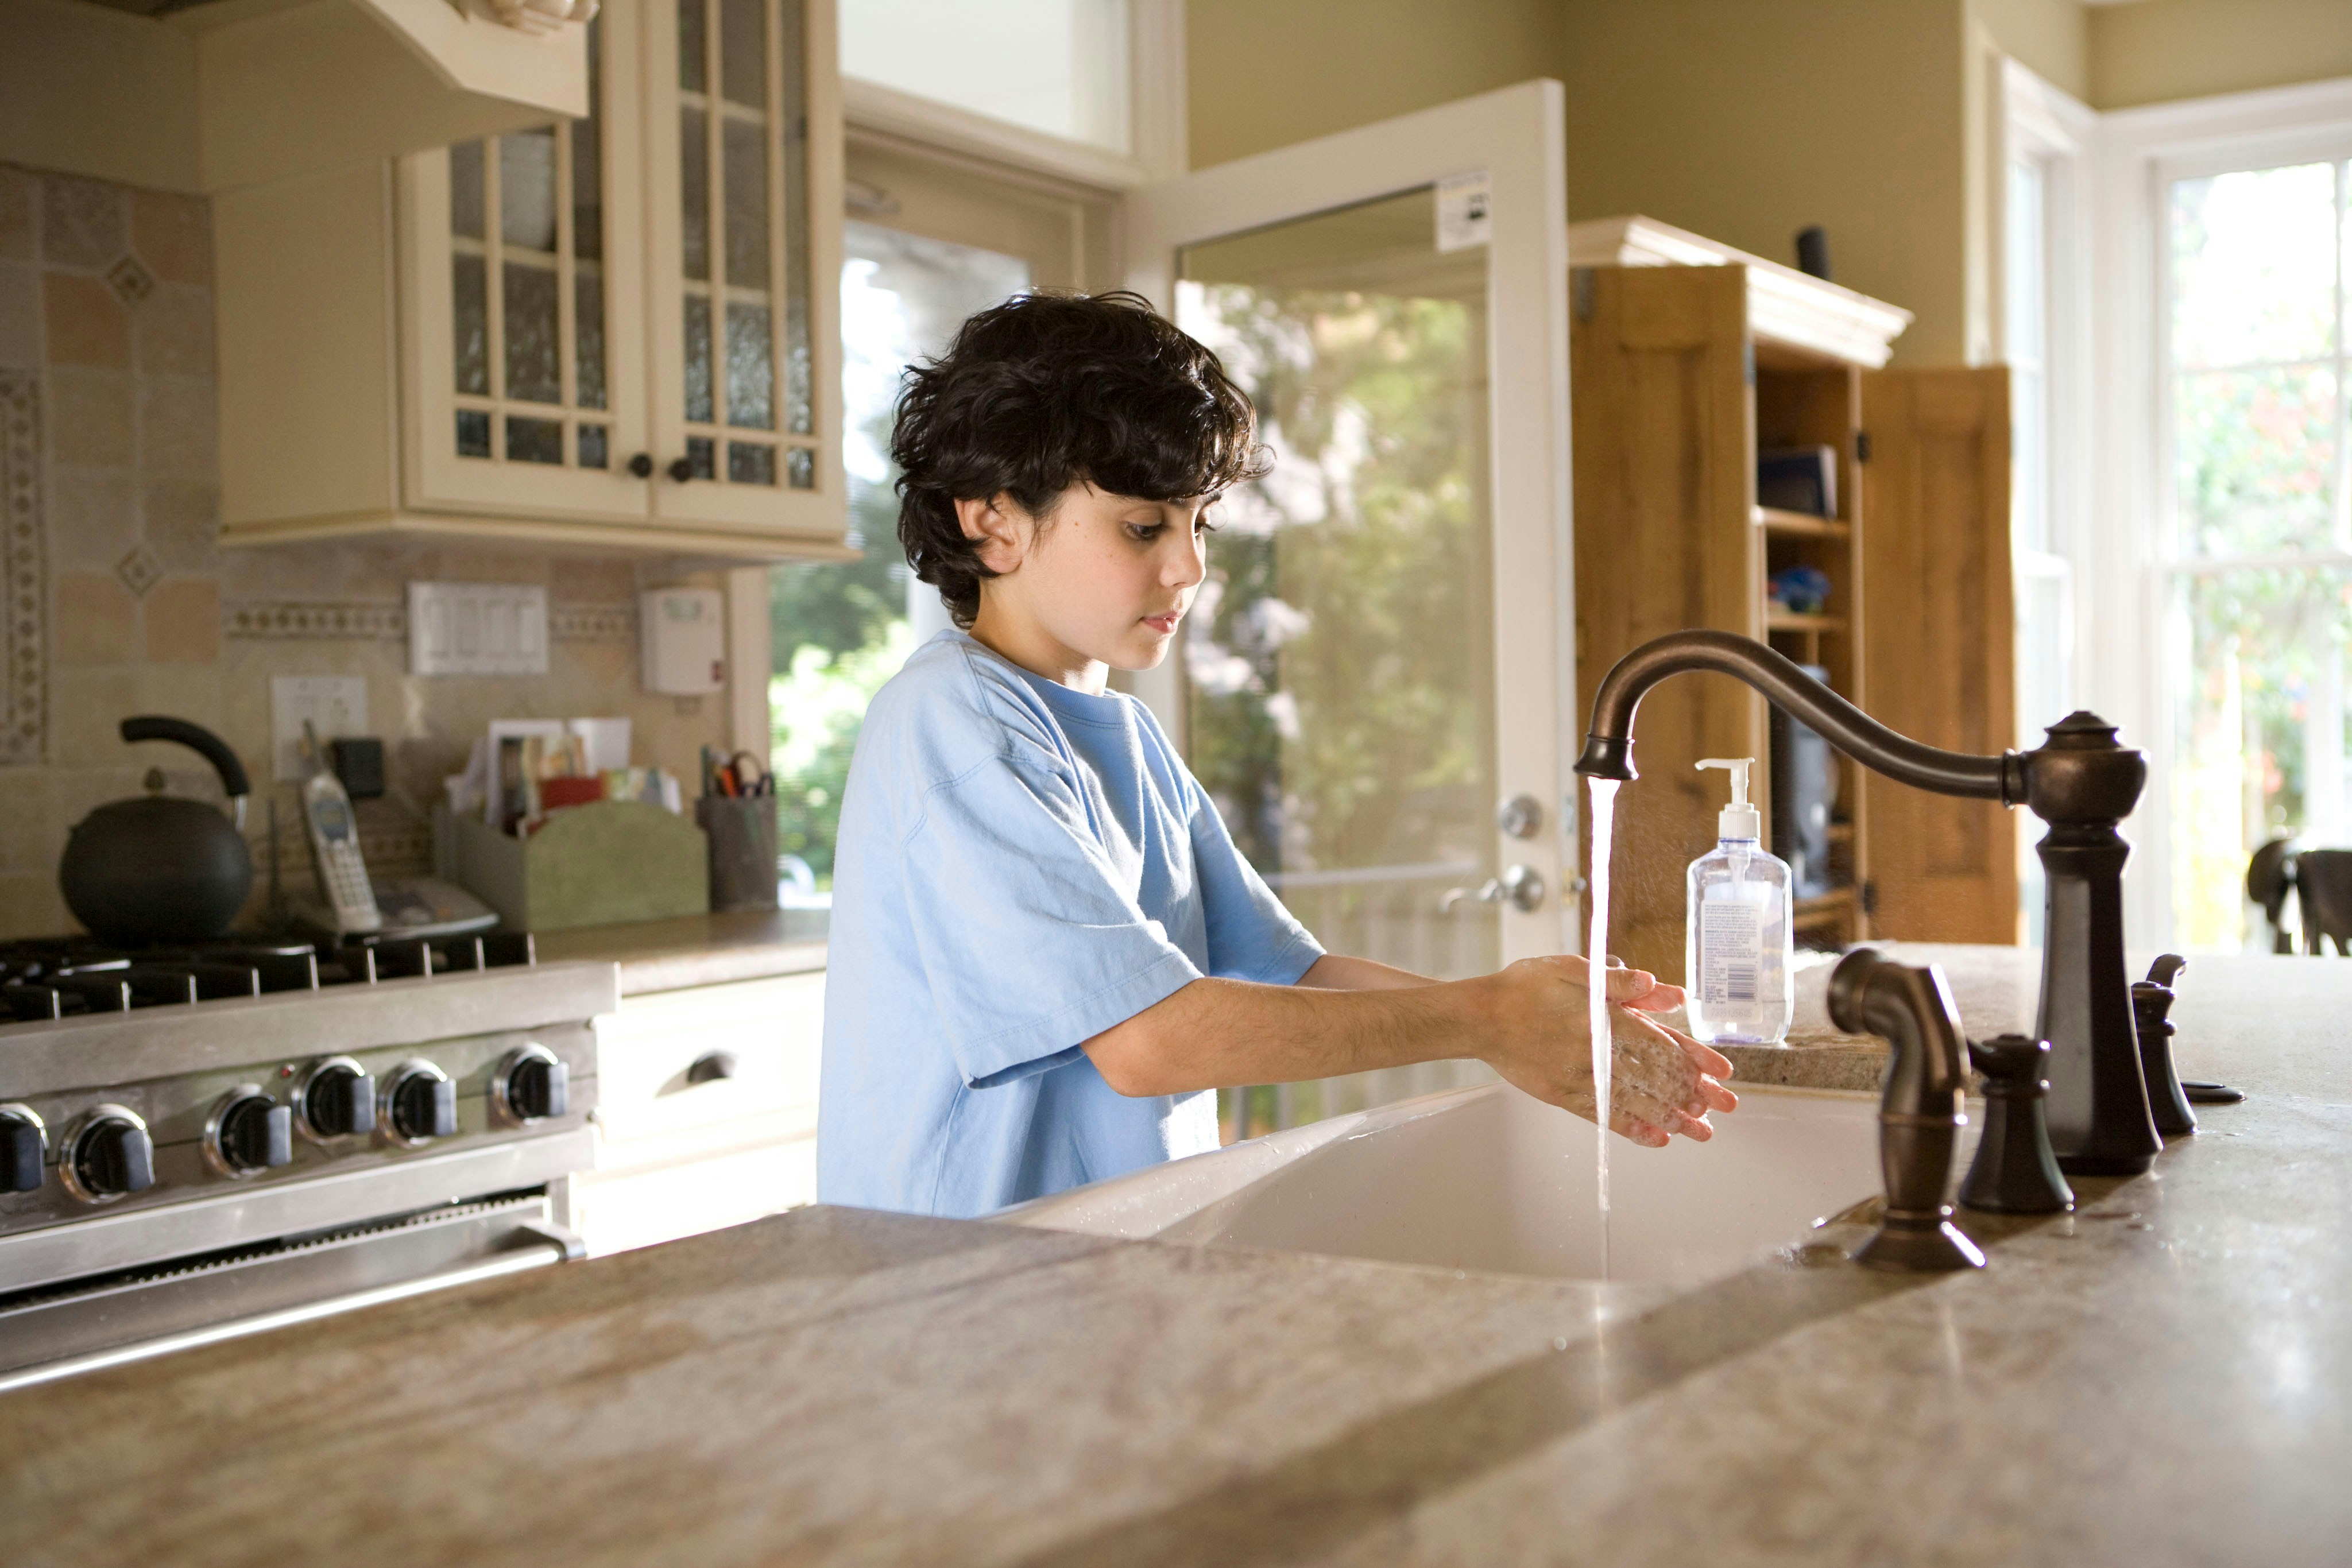 This young boy was shown in the process of properly washing his hands at his kitchen sink, briskly rubbing his soapy hands together under fresh running tap water, in order to remove germs, and contaminants, thereby, reducing the spread of pathogens, and his ingestion of environmental chemicals or toxins. Children are taught to recite the Happy Birthday song, during hand washing, allotting enough time to completely clean their hands.